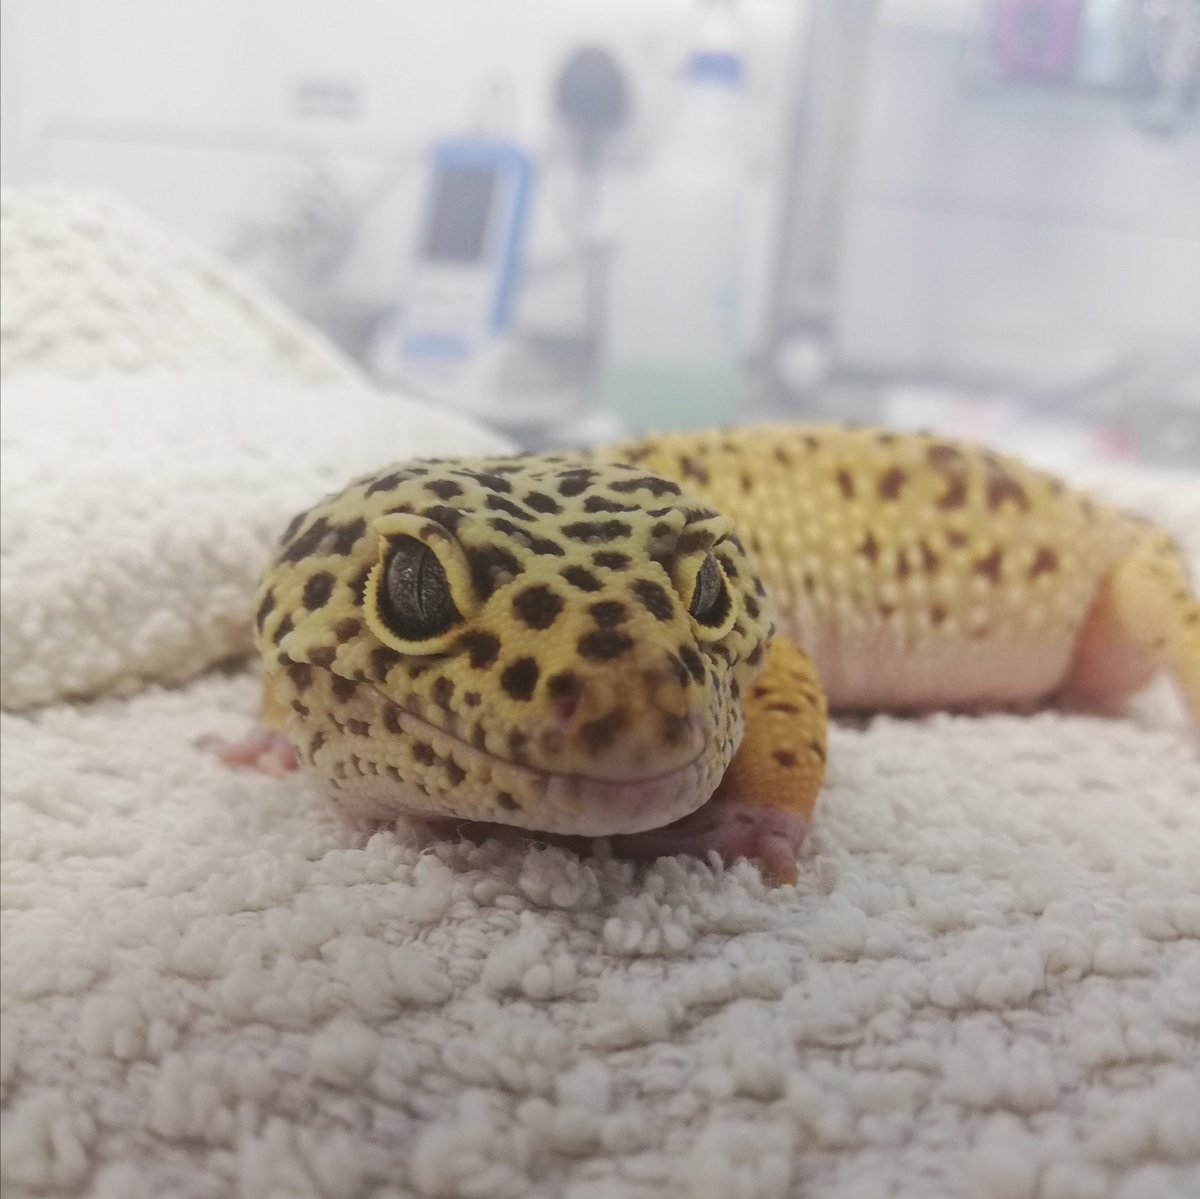 This morning's diary:
Cat
Dog
Leopard gecko
Guinea pig
Dog
Rabbit
Tortoise
This is the variety I love 👌❤️
#VetTwitter #ExoticVet #ExoticPet #LeopardGecko #BoopTheSnoot